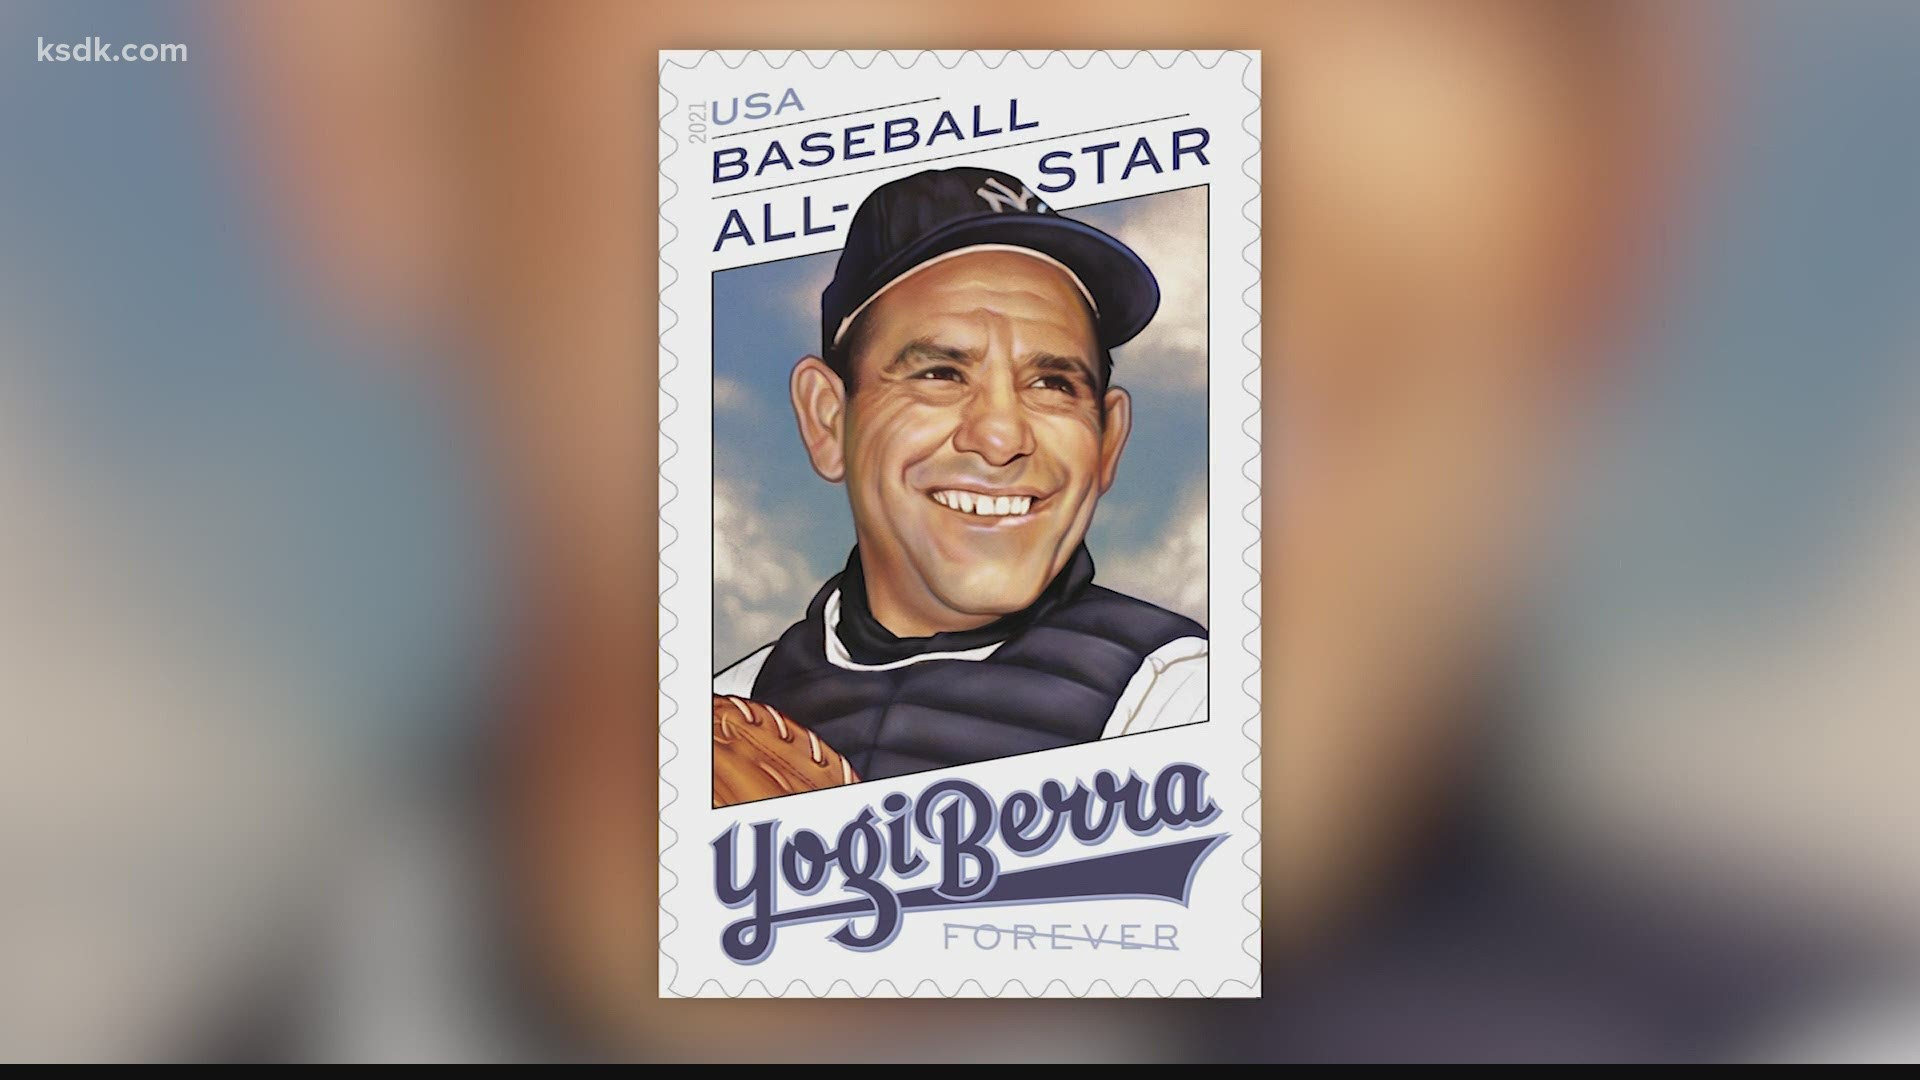 A smiling Yogi Berra donning the Yankee pinstripes will soon be featured on a stamp